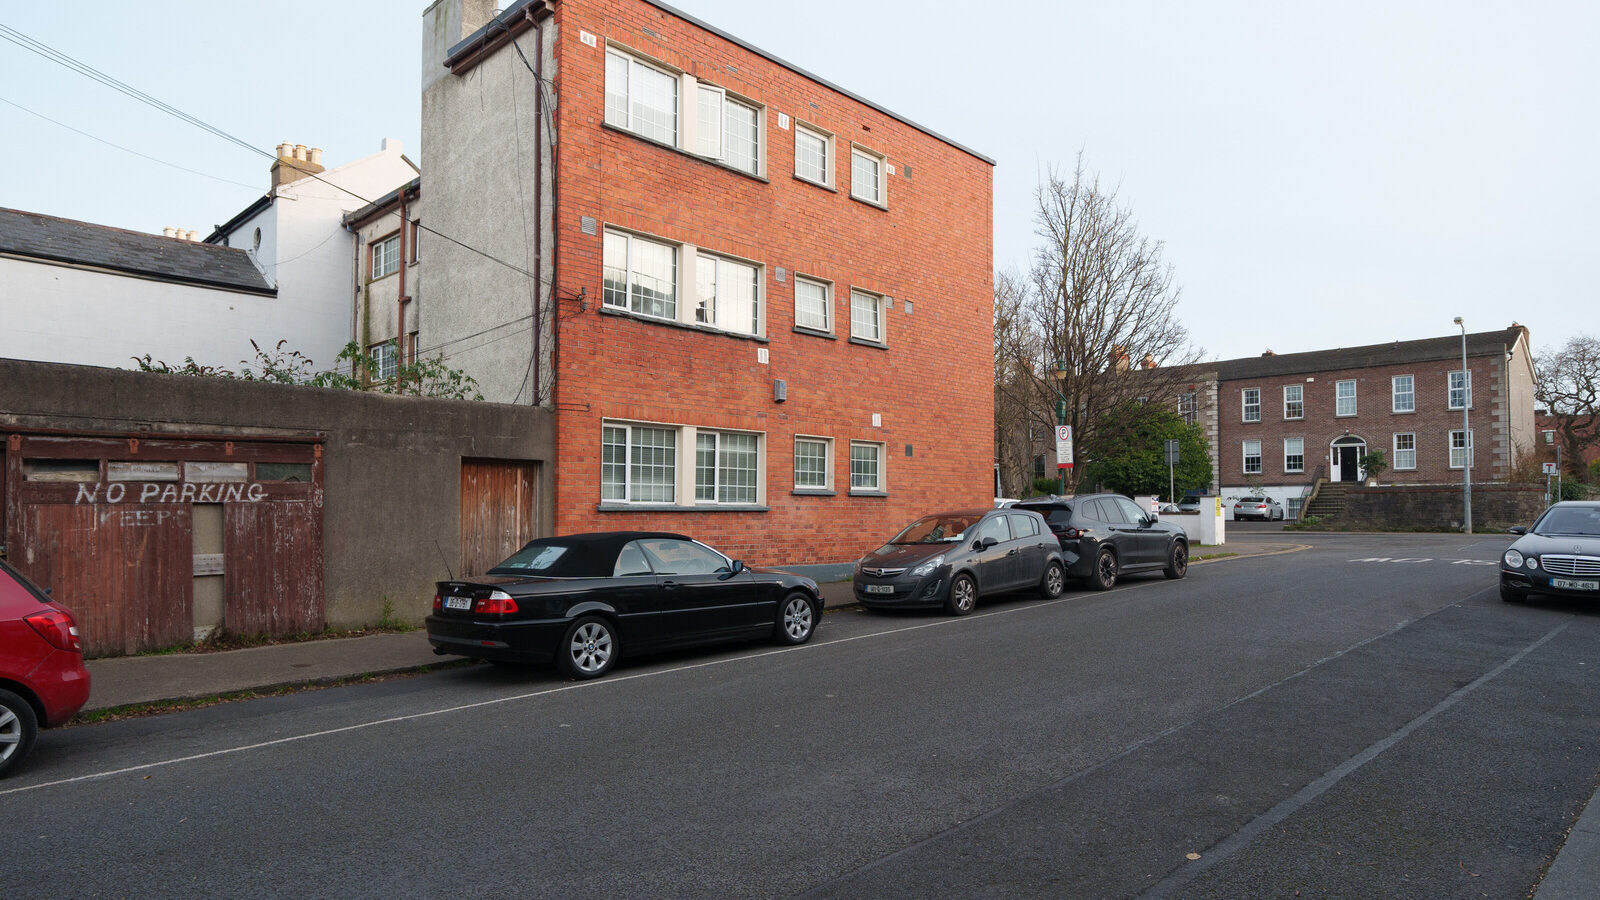 MY FIRST TIME TO EXPLORE CHURCH GARDENS [OFF CASTLEWOOD AVENUE IN RATHMINES]-227338-1